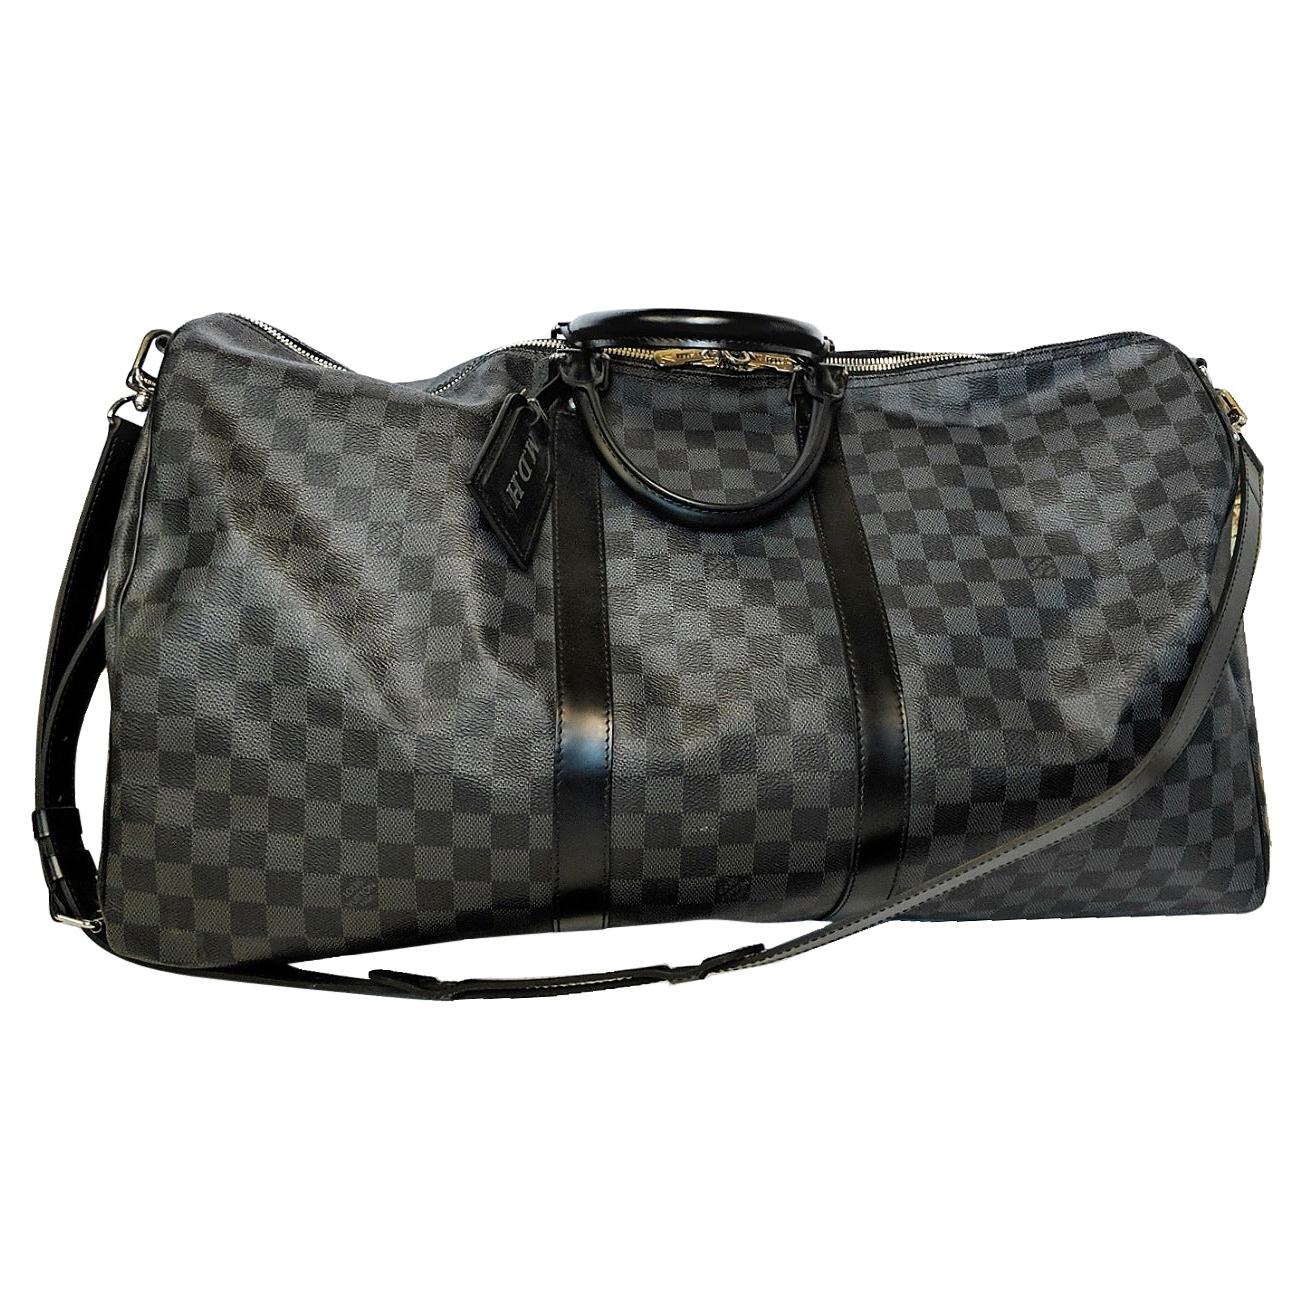 Louis Vuitton Damier Graphite Keepall Bandouliere 55 Luggage